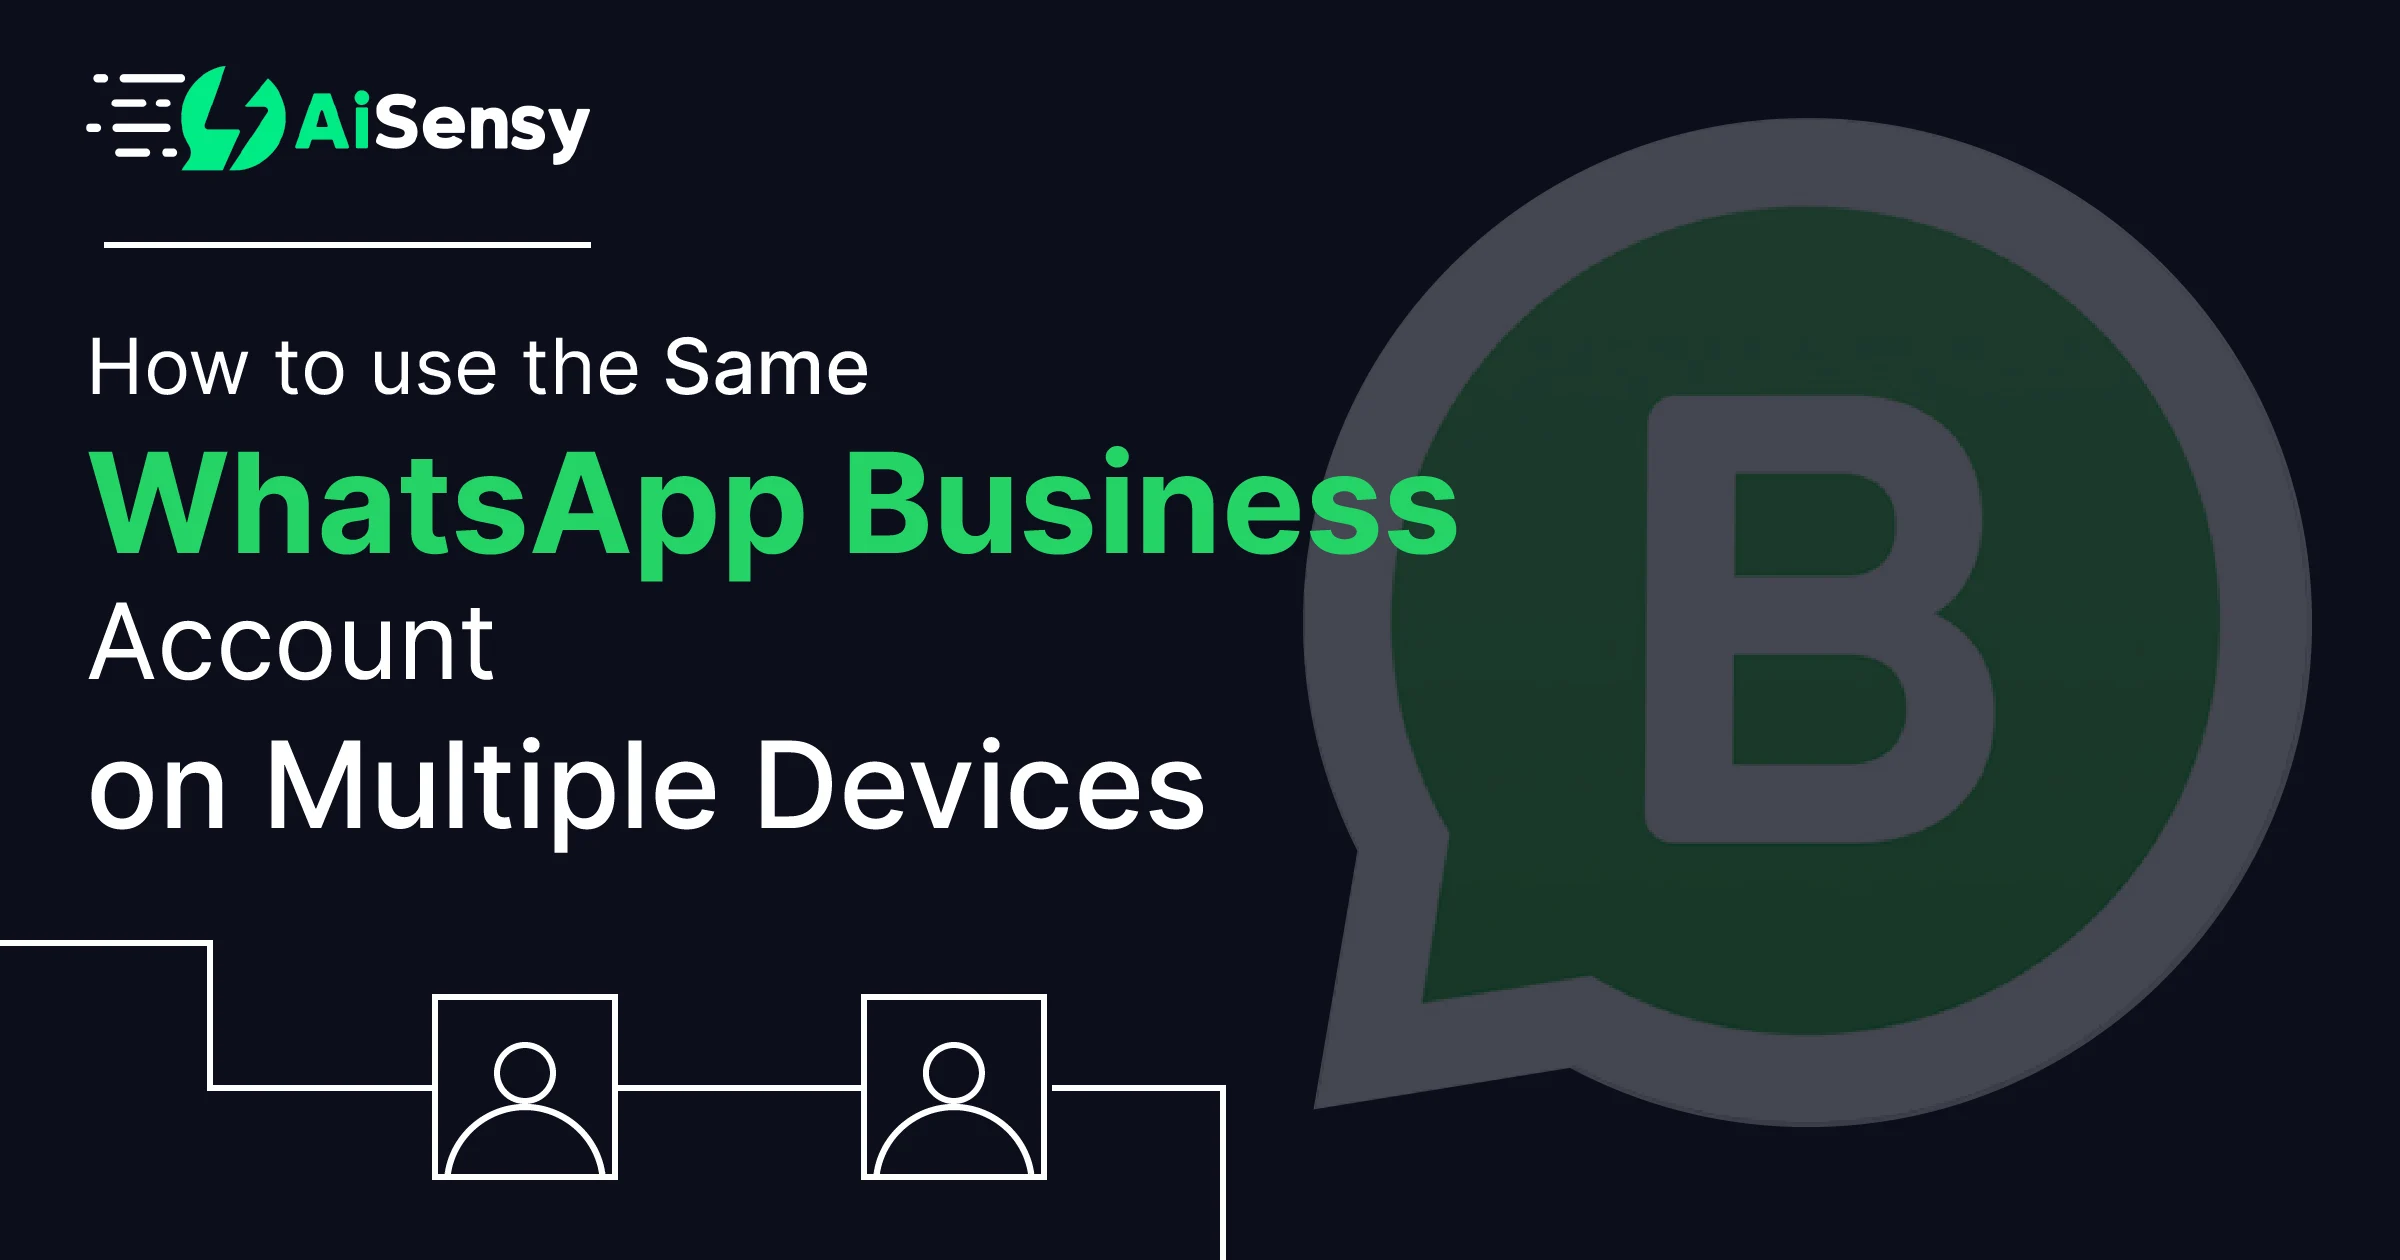 ways to use WhatsApp Business on multiple devices